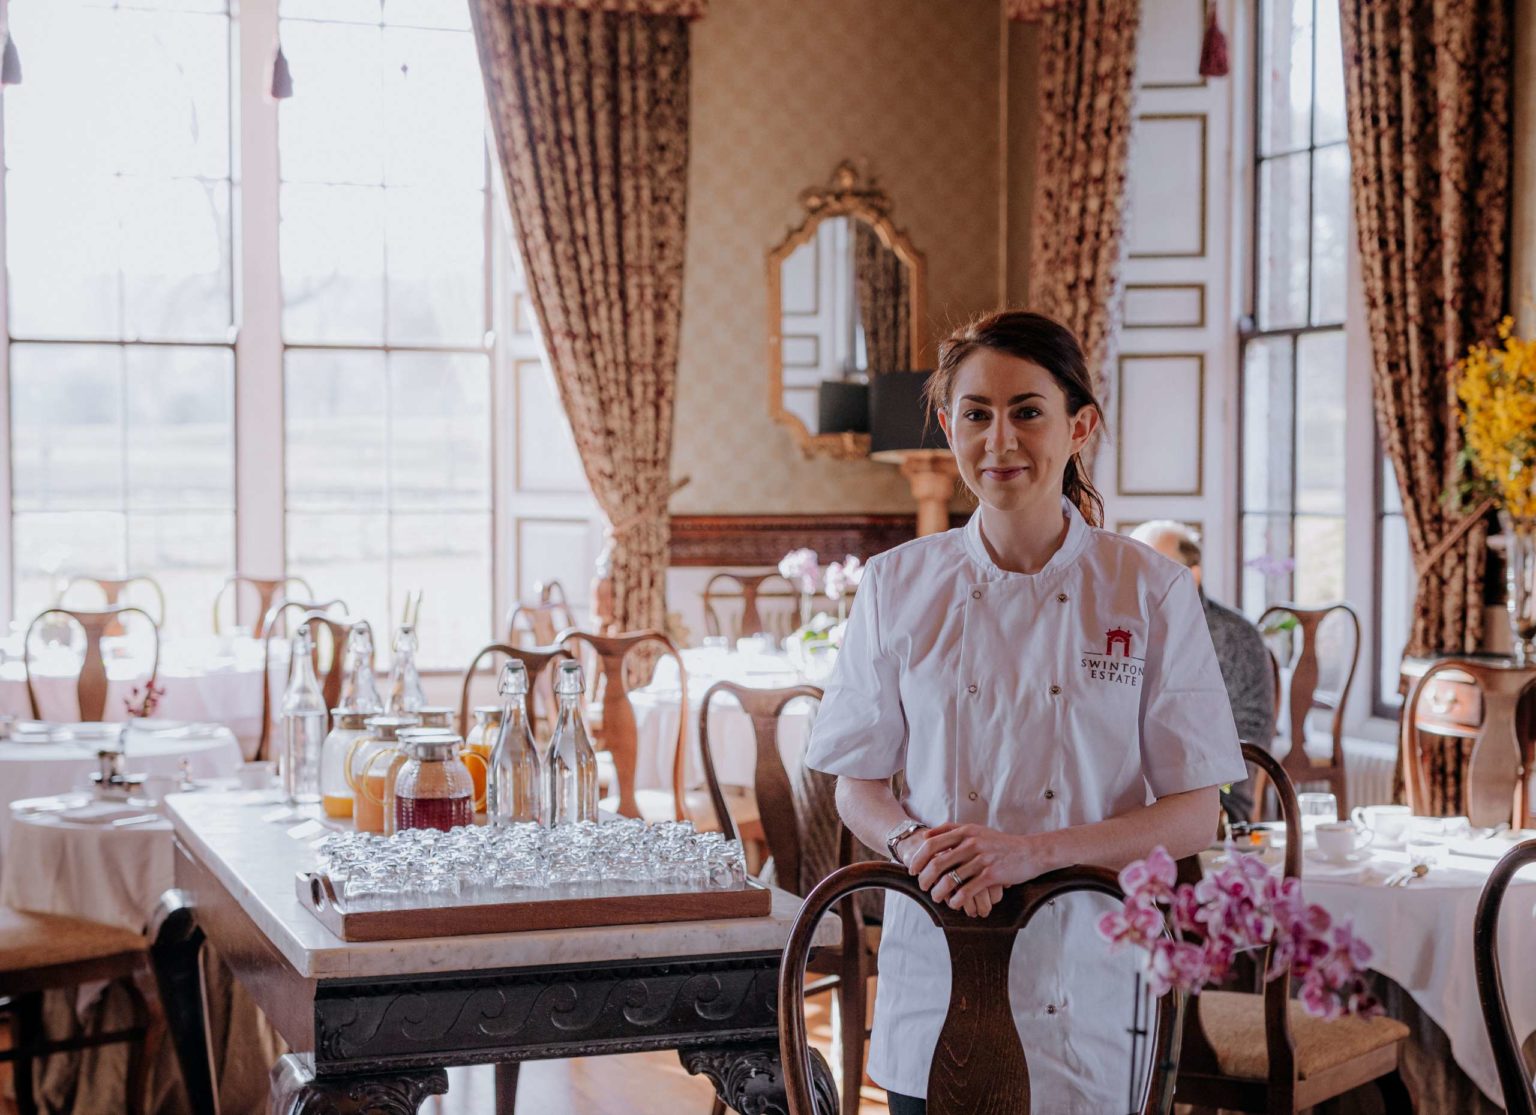 Chef Ruth Hansom standing among the tables and chairs in Samuel's Restaurant on the Swinton Estate in North Yorkshire